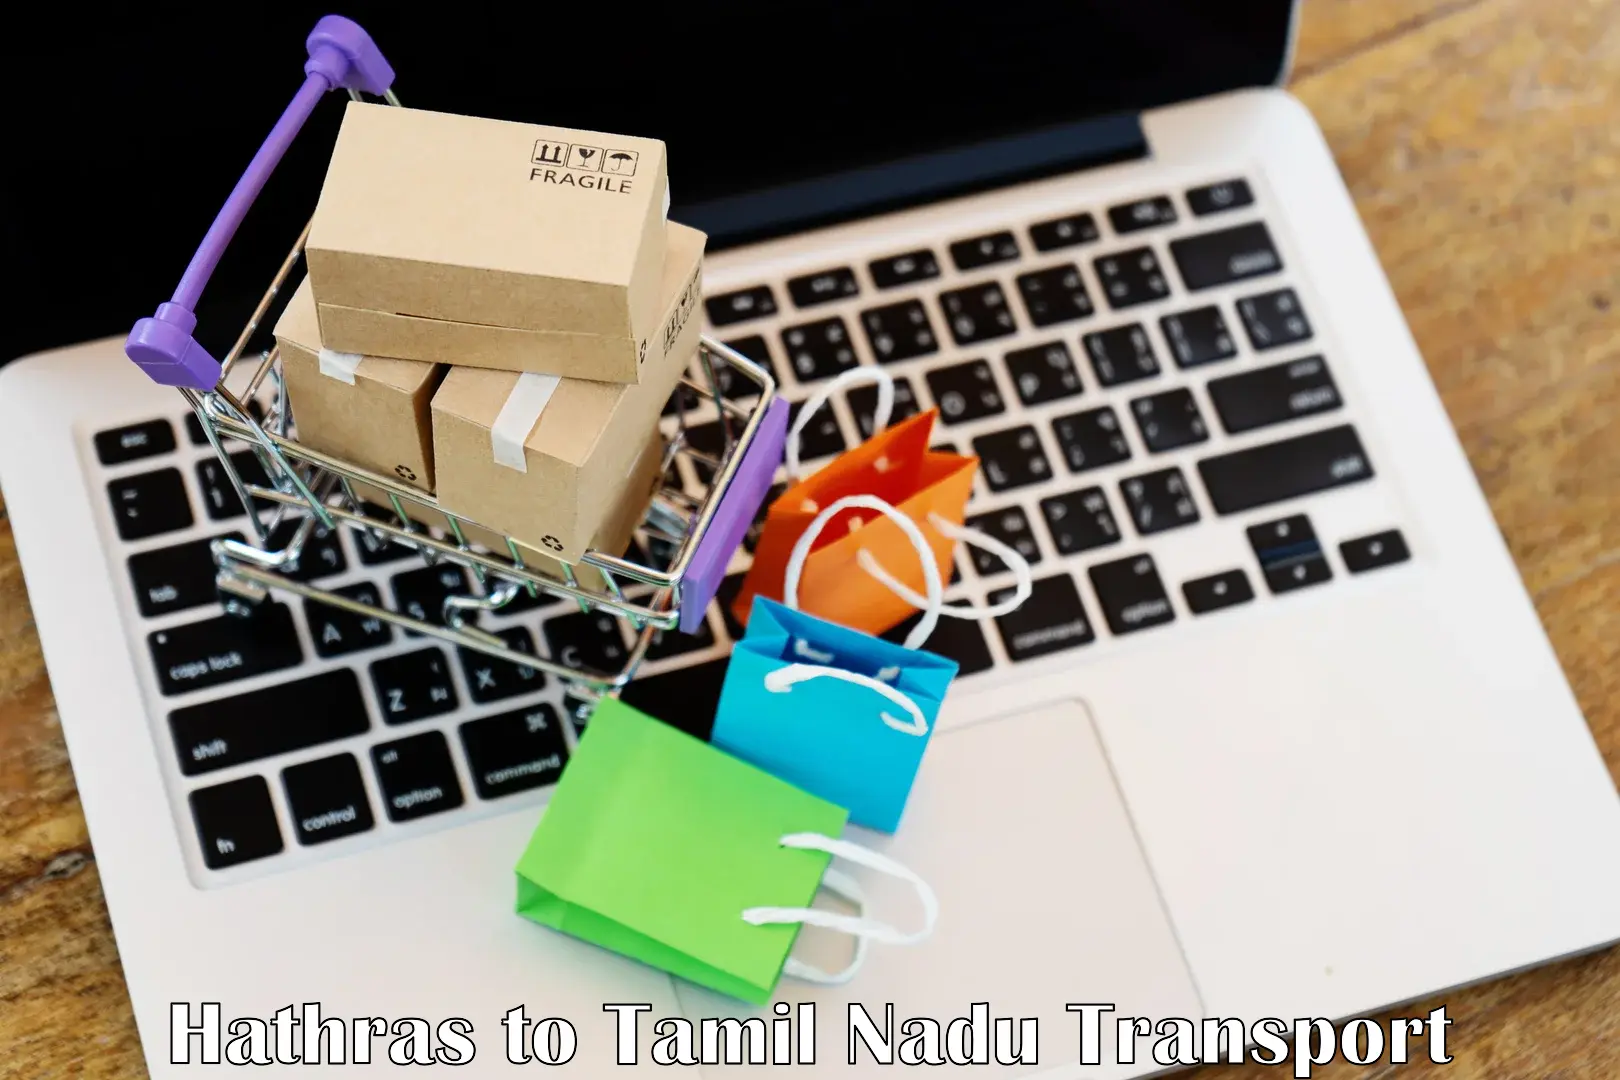 Online transport booking Hathras to Vellore Institute of Technology